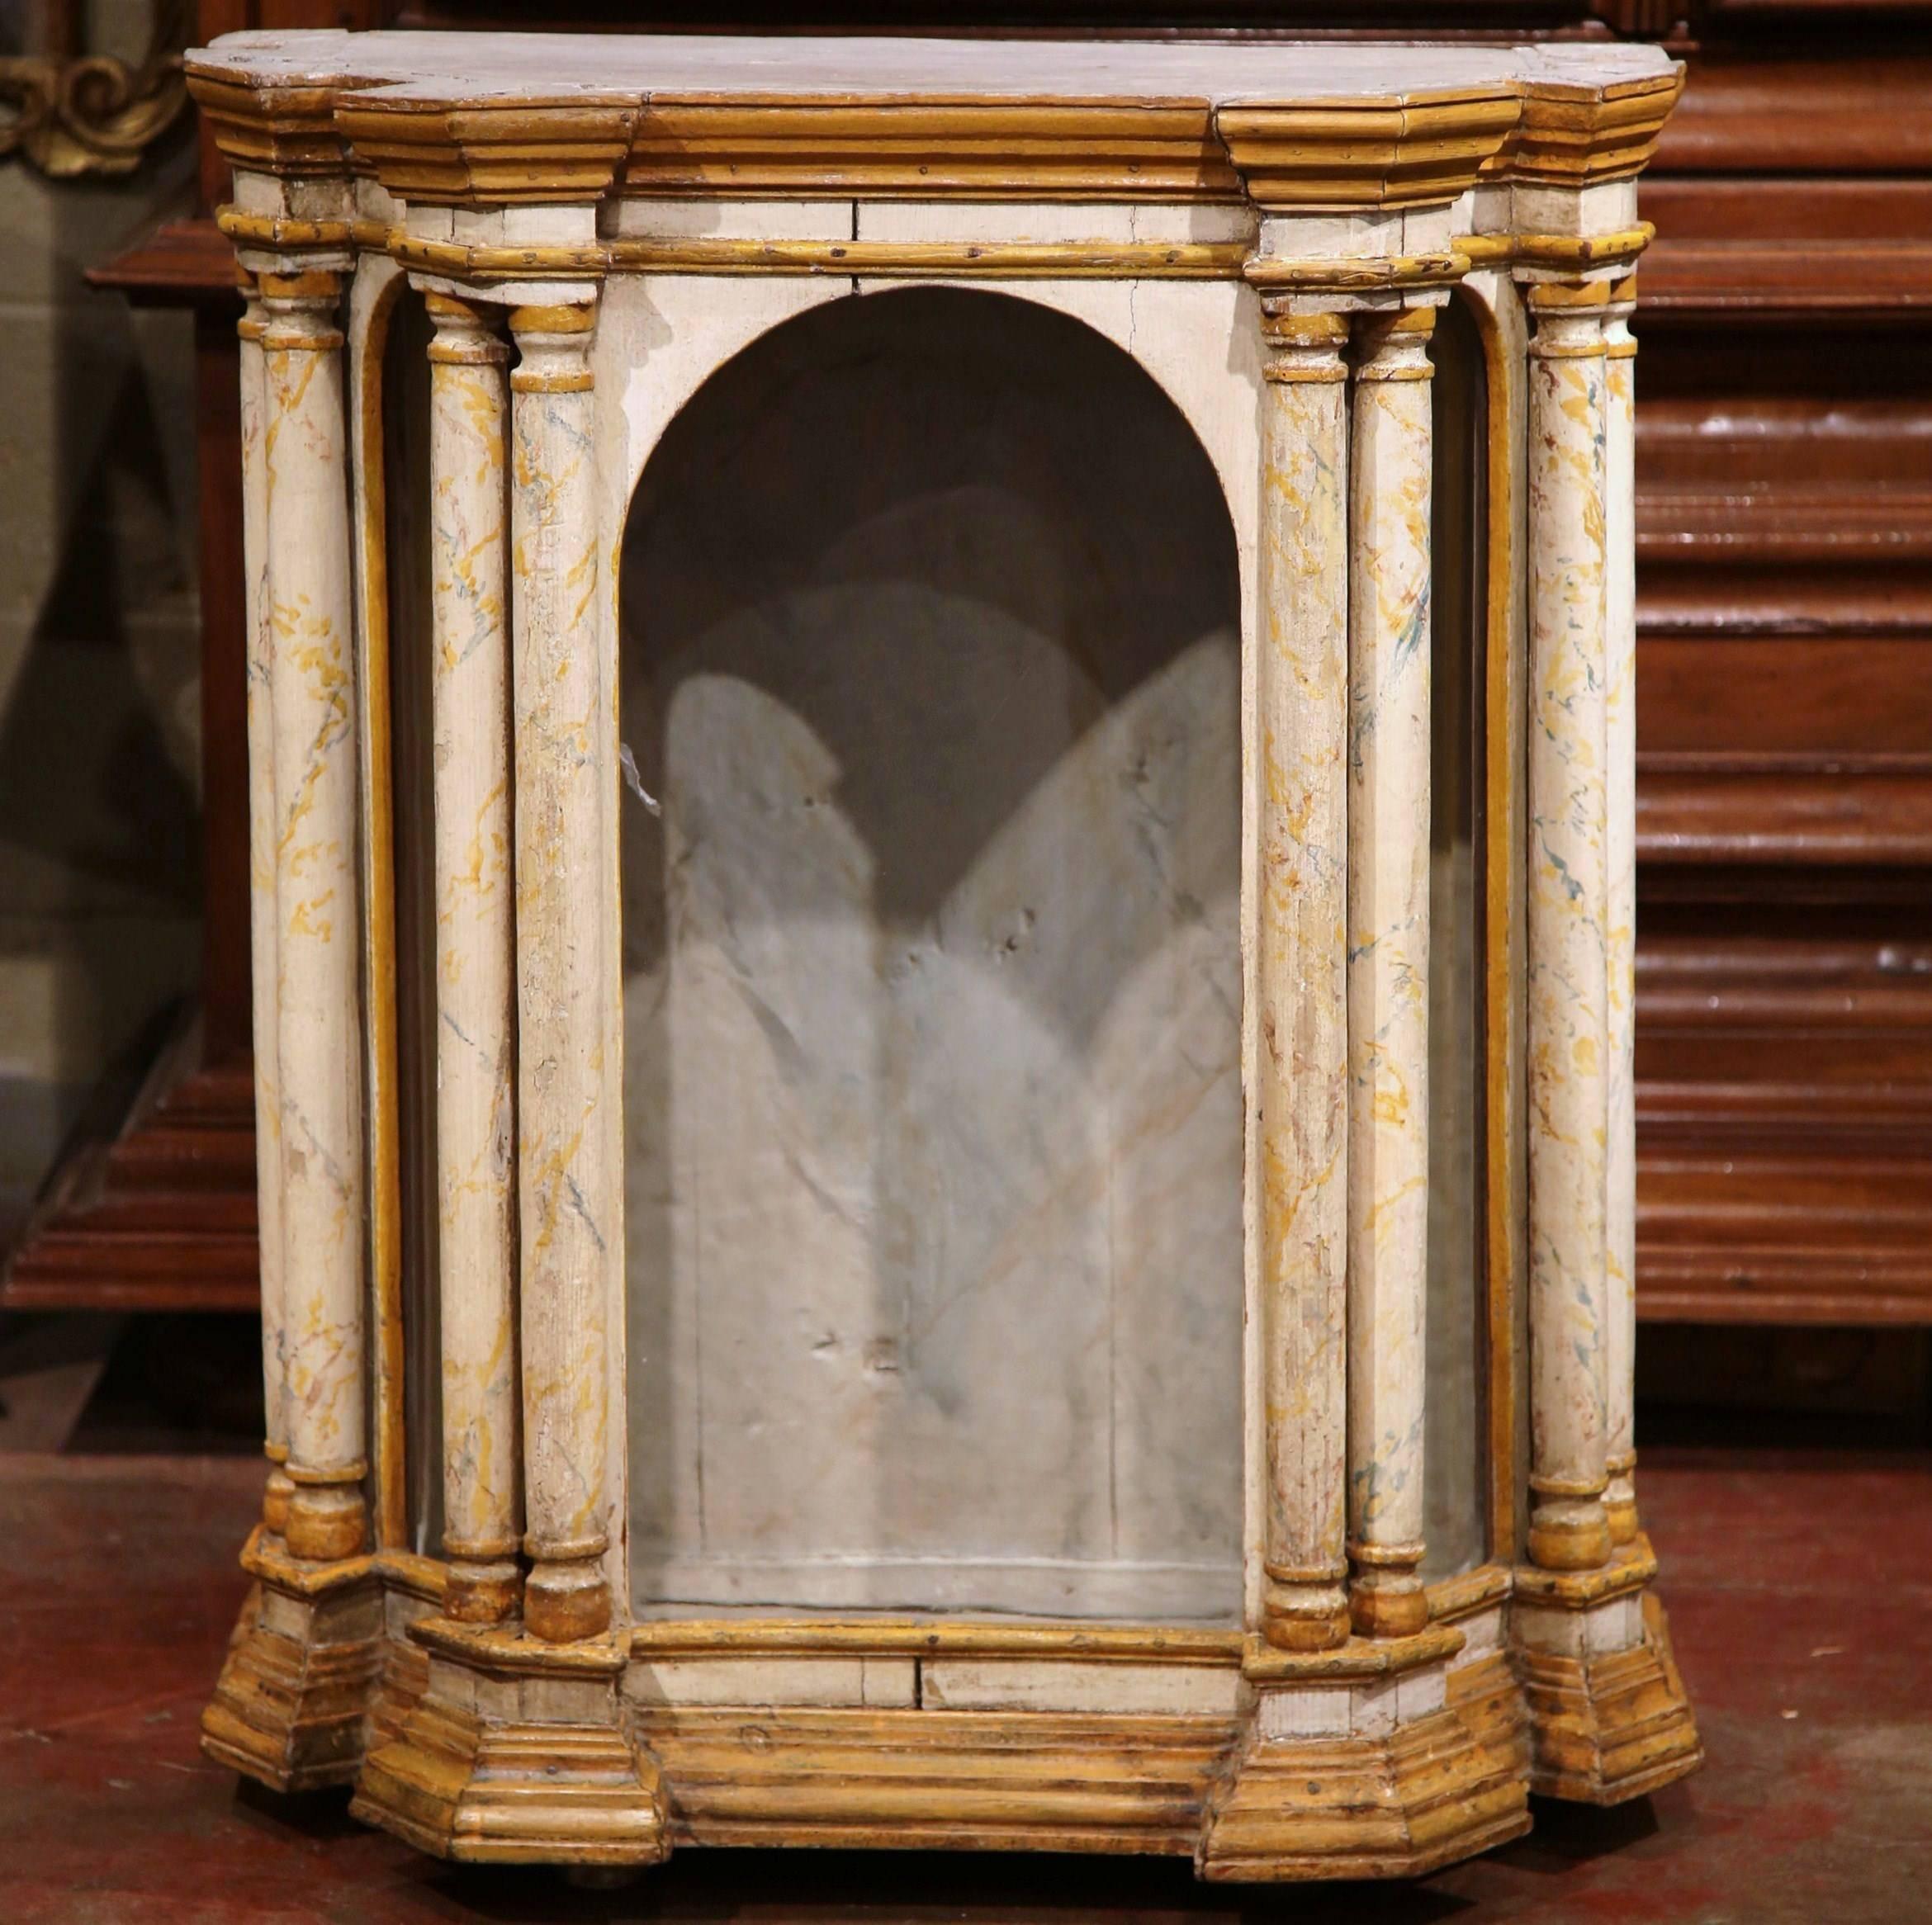 Hand-Carved 18th Century Italian Carved Painted Reliquary Cabinet with Glass Door and Sides